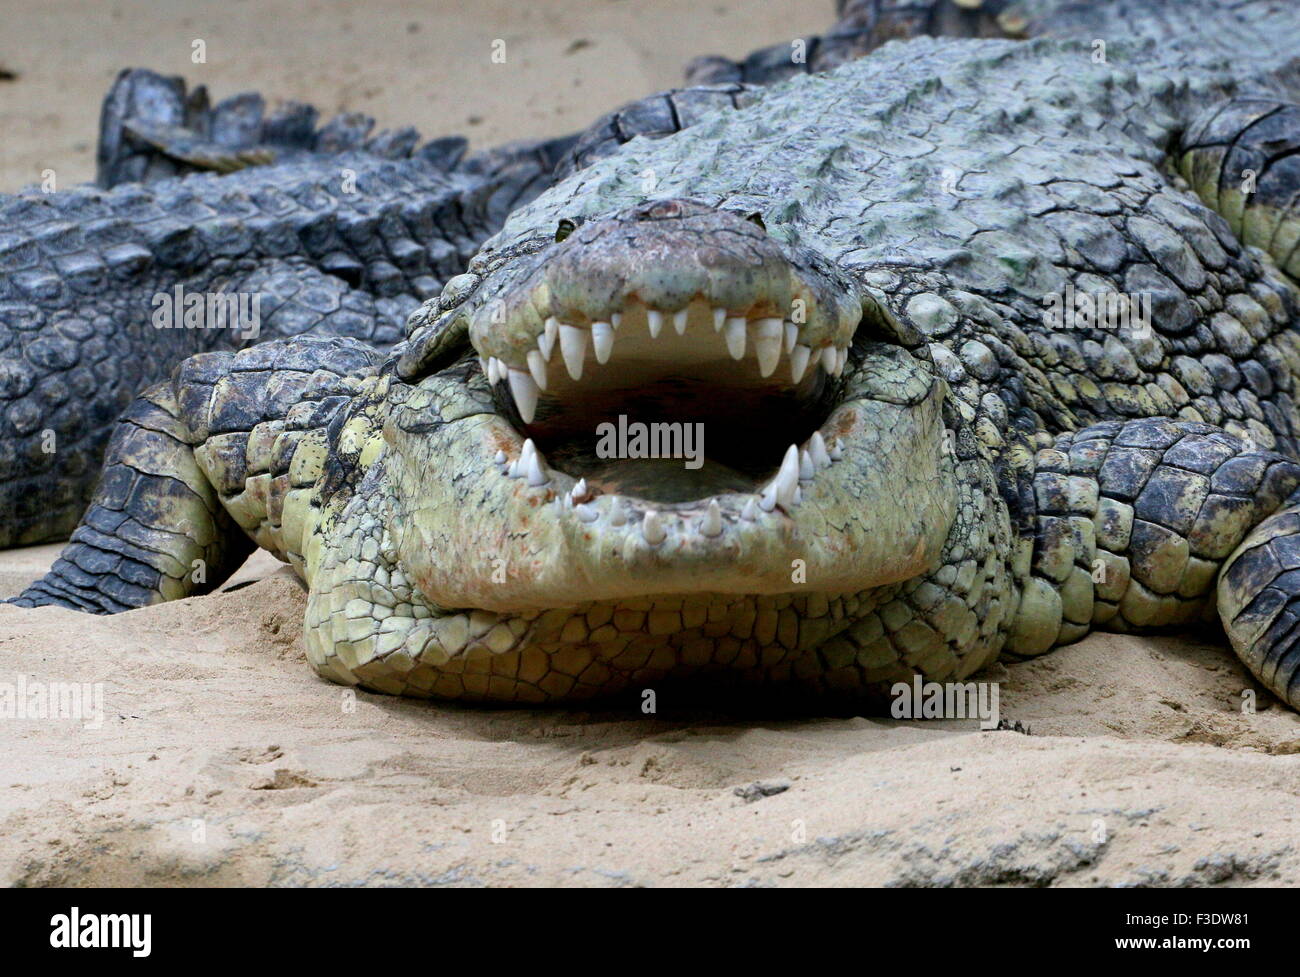 Mature African Nile crocodile (Crocodylus niloticus) basking in the sun, mouth wide open Stock Photo